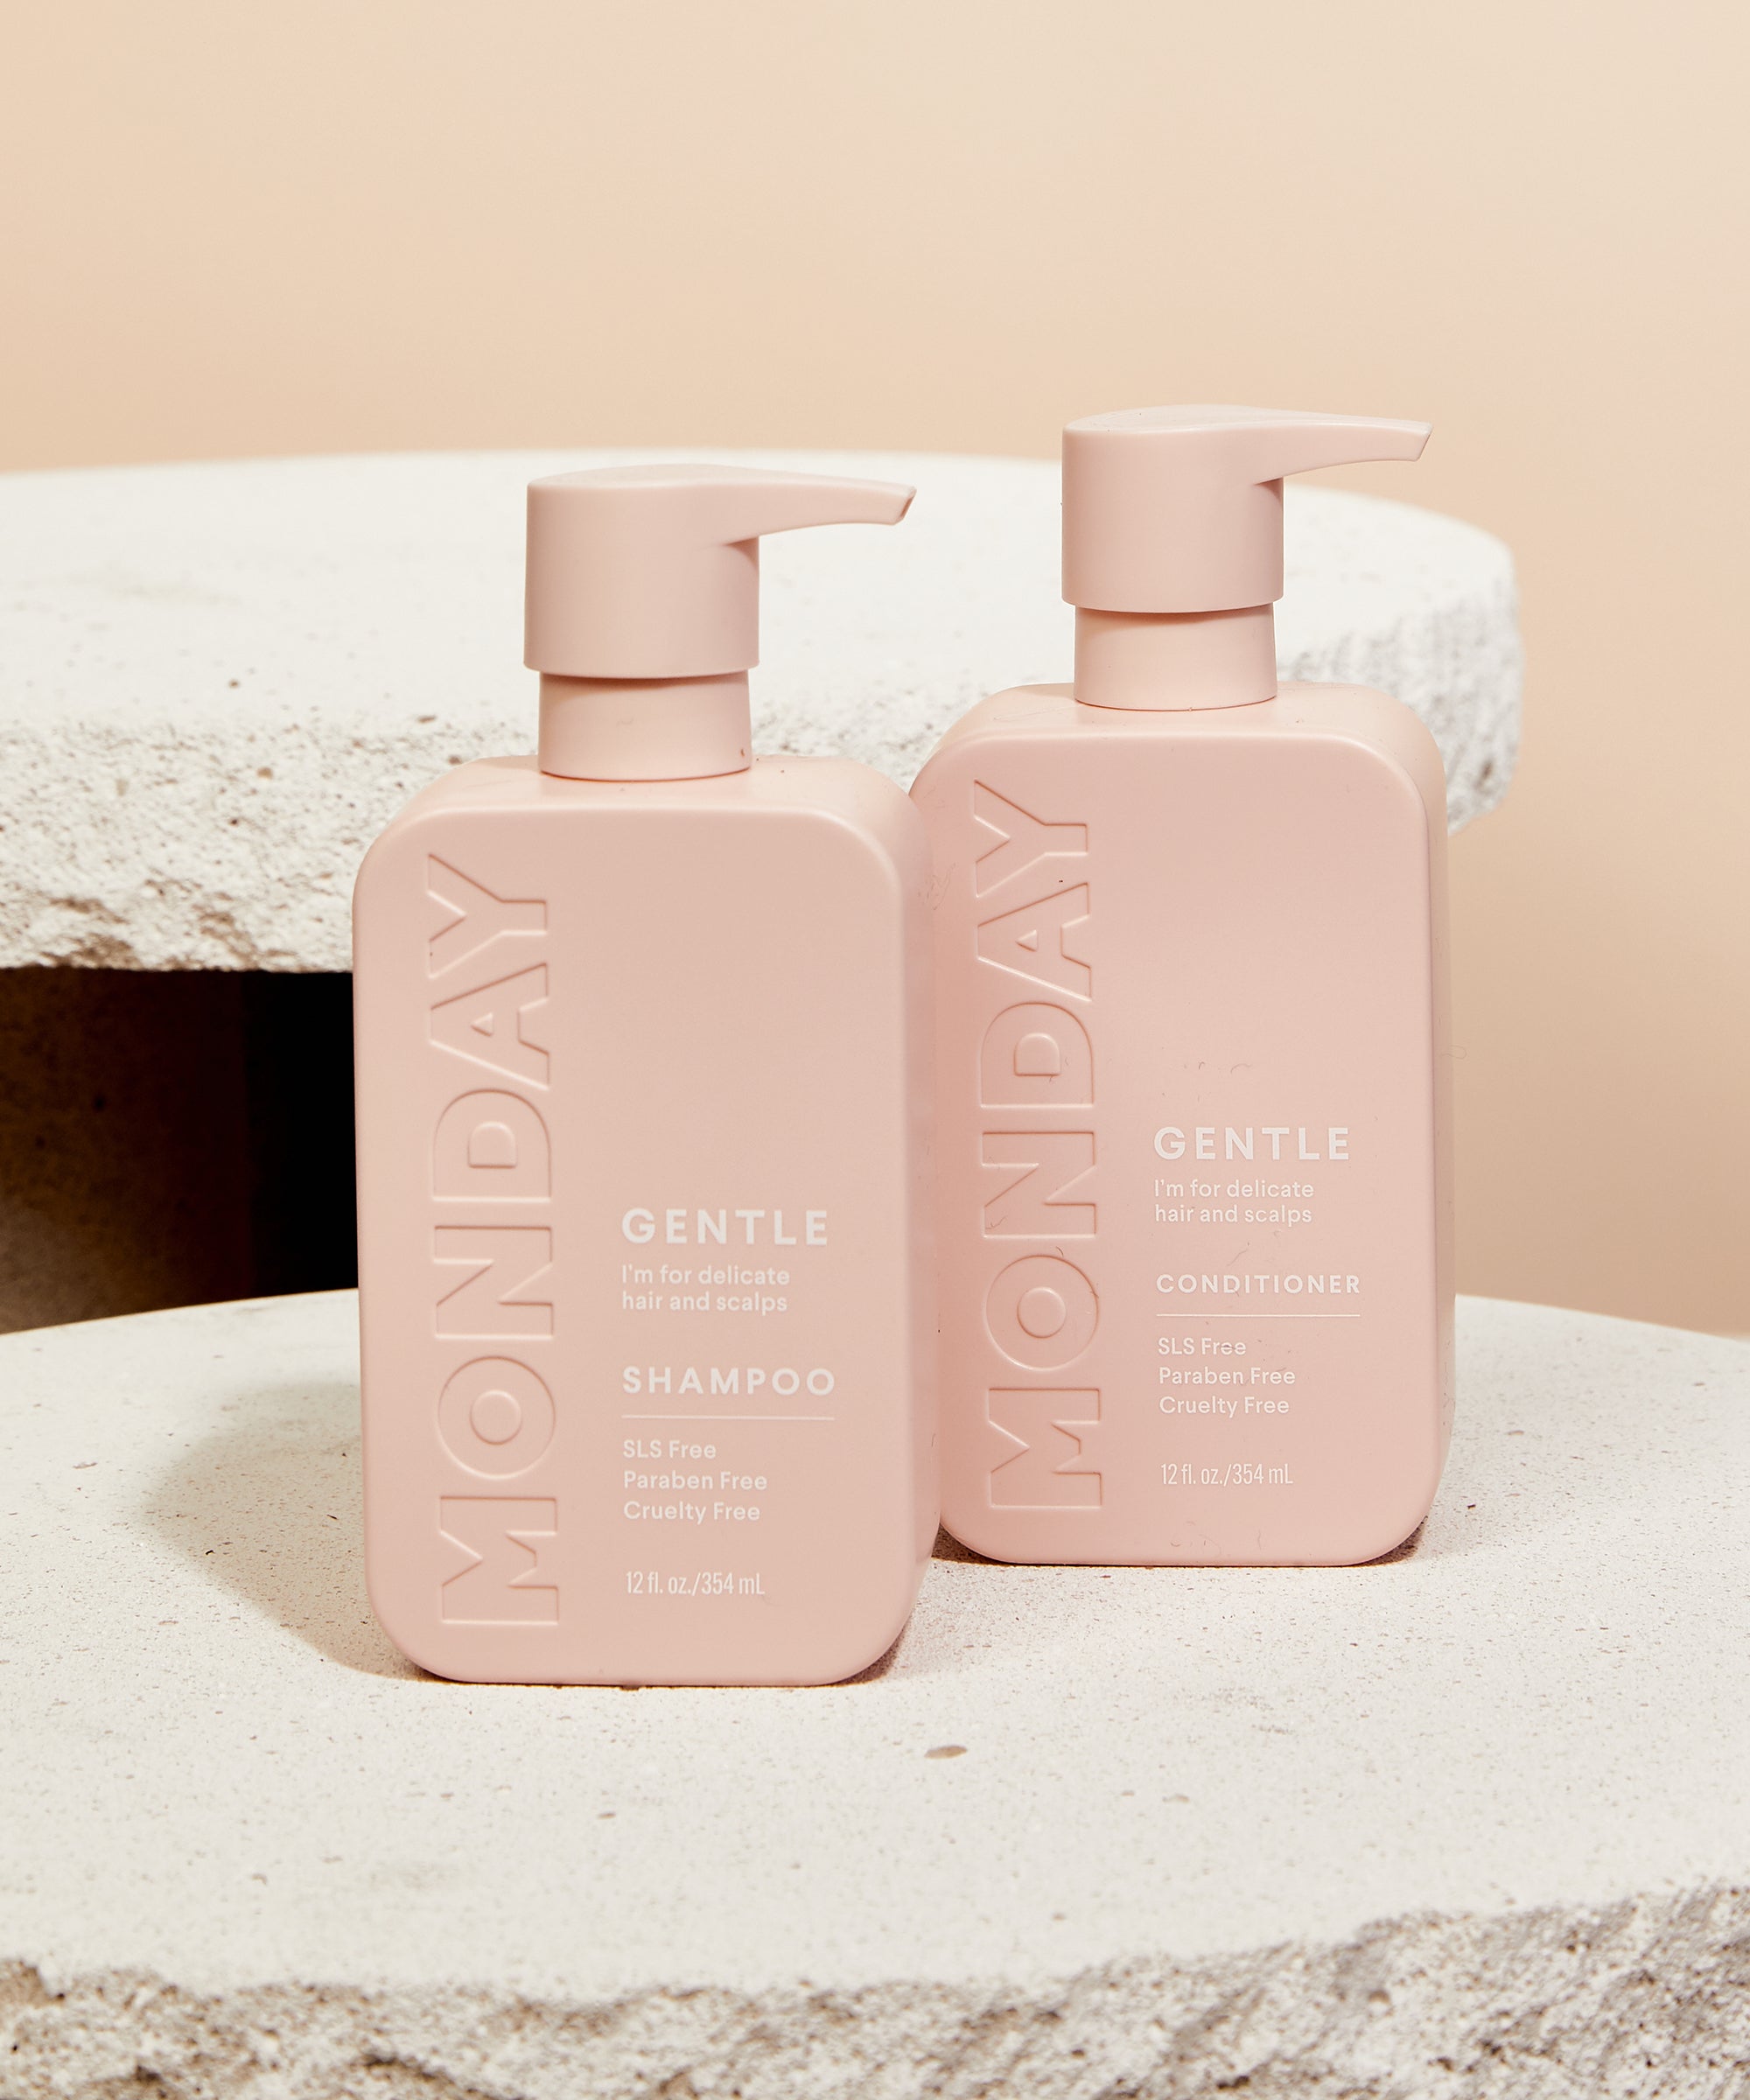 Monday Haircare Top-Selling Aussie New At Target